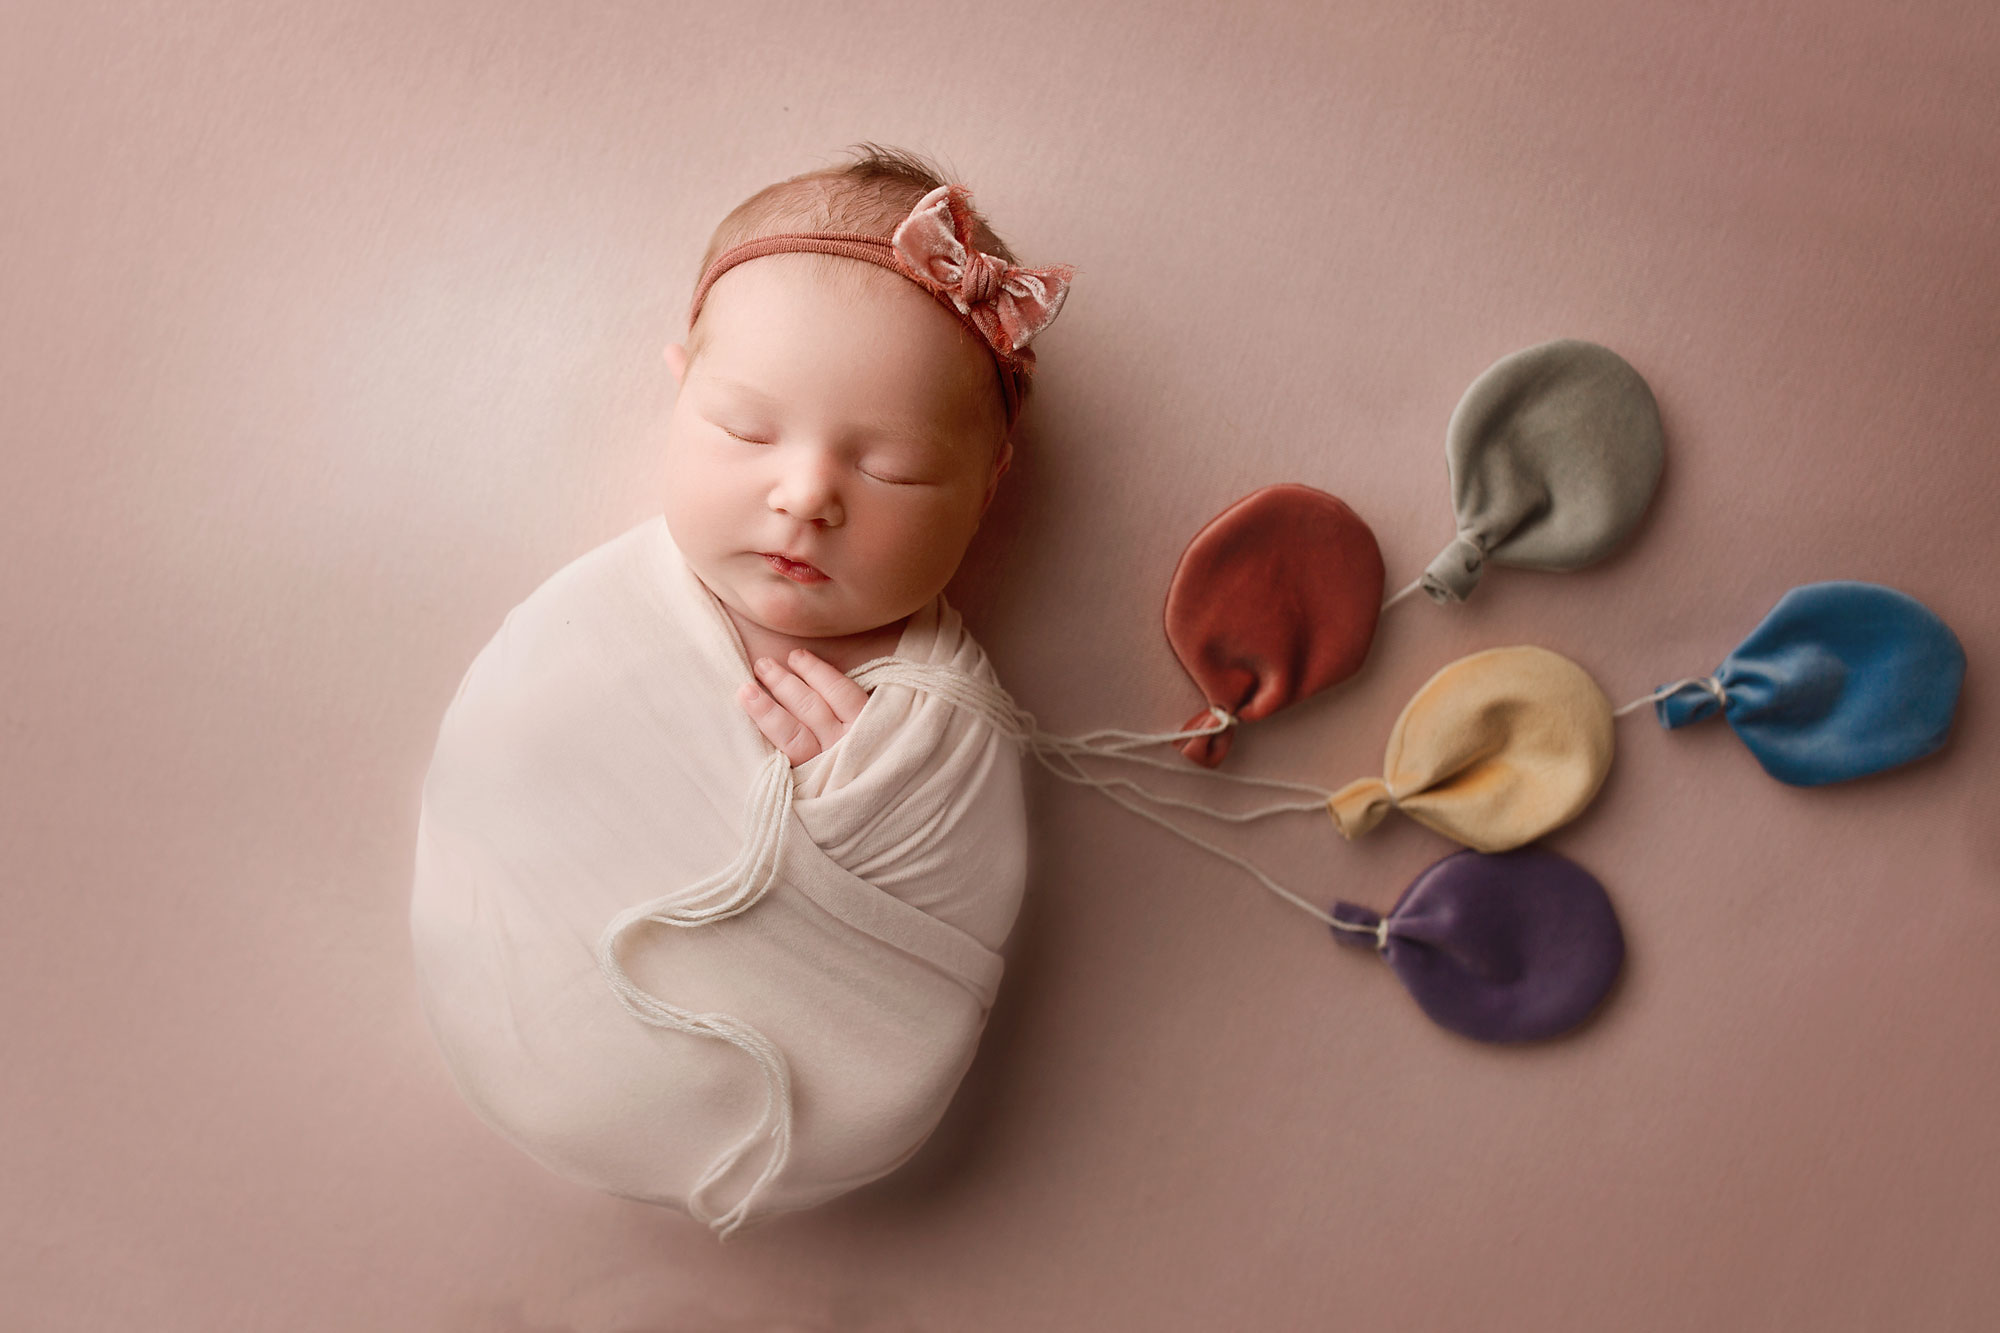 somerset county rainbow baby photo session